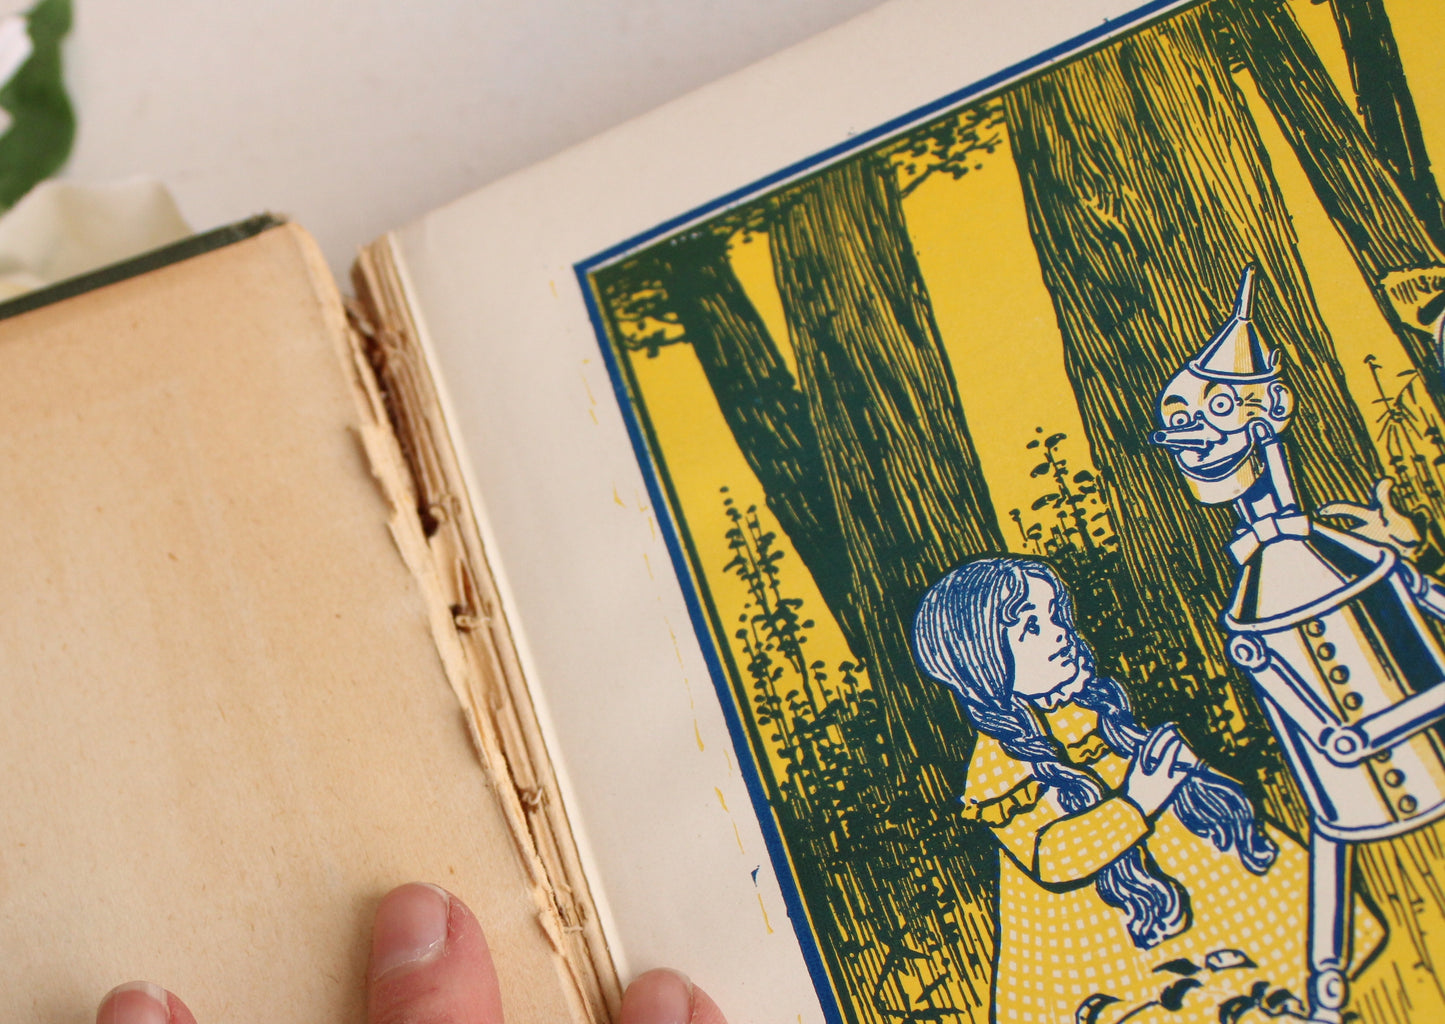 Antique 1903 Edition of The New Wizard of Oz by Frrank Baum